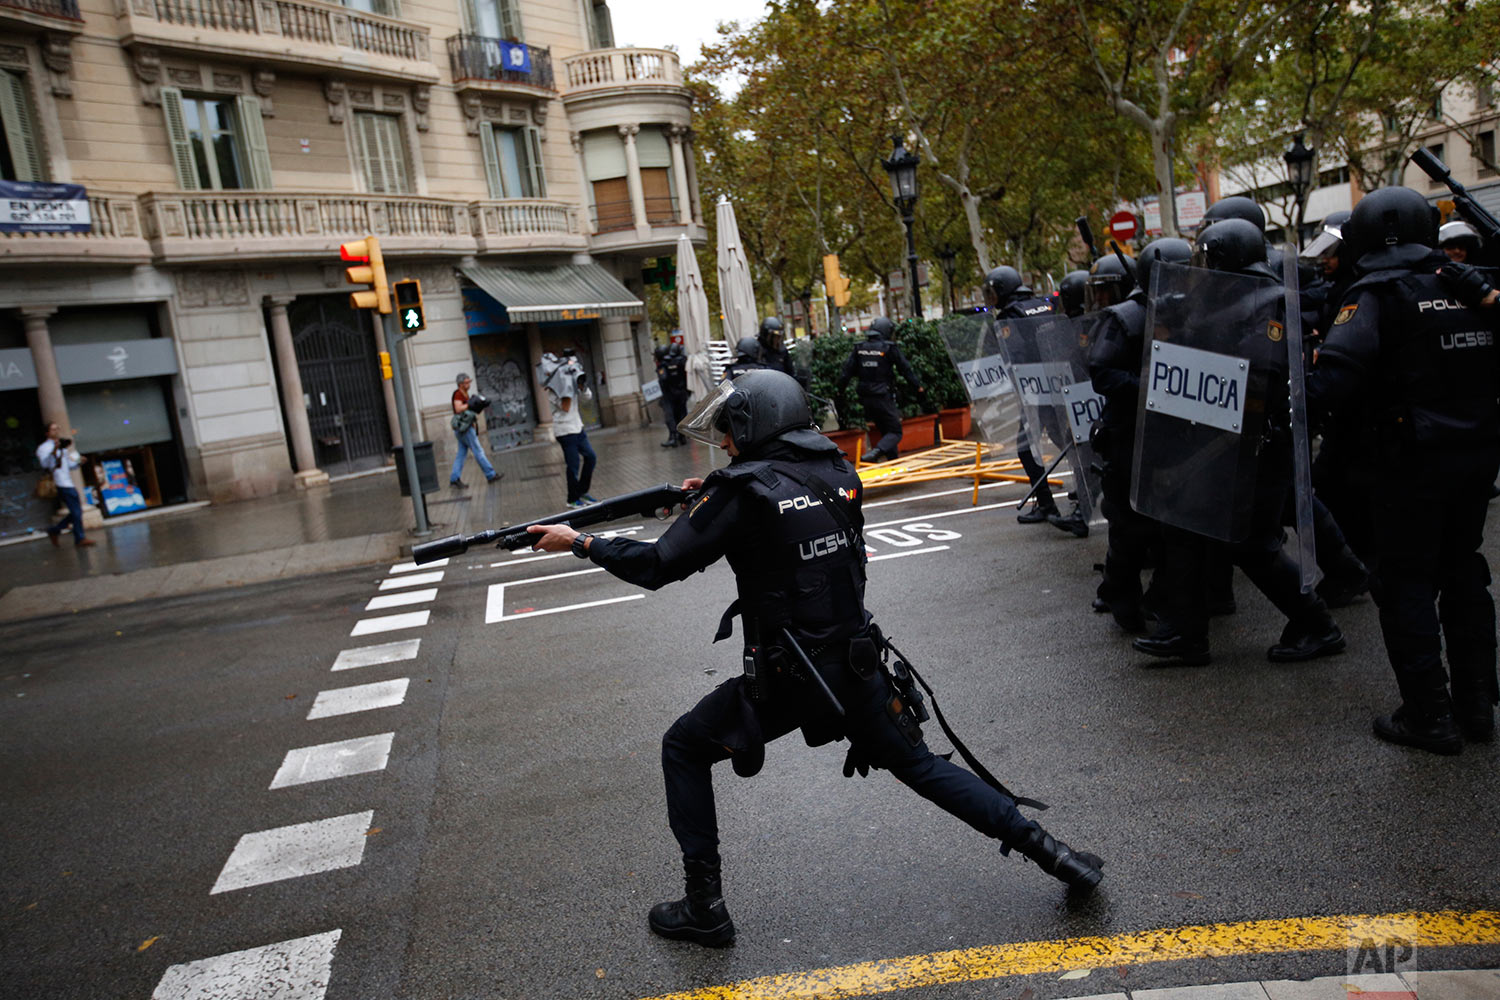  Spanish riot police shoots rubber bullet straight to people trying to reach a voting site at a school assigned to be a polling station by the Catalan government in Barcelona, Spain, Sunday, Oct. 1, 2017. Spanish riot police have forcefully removed a